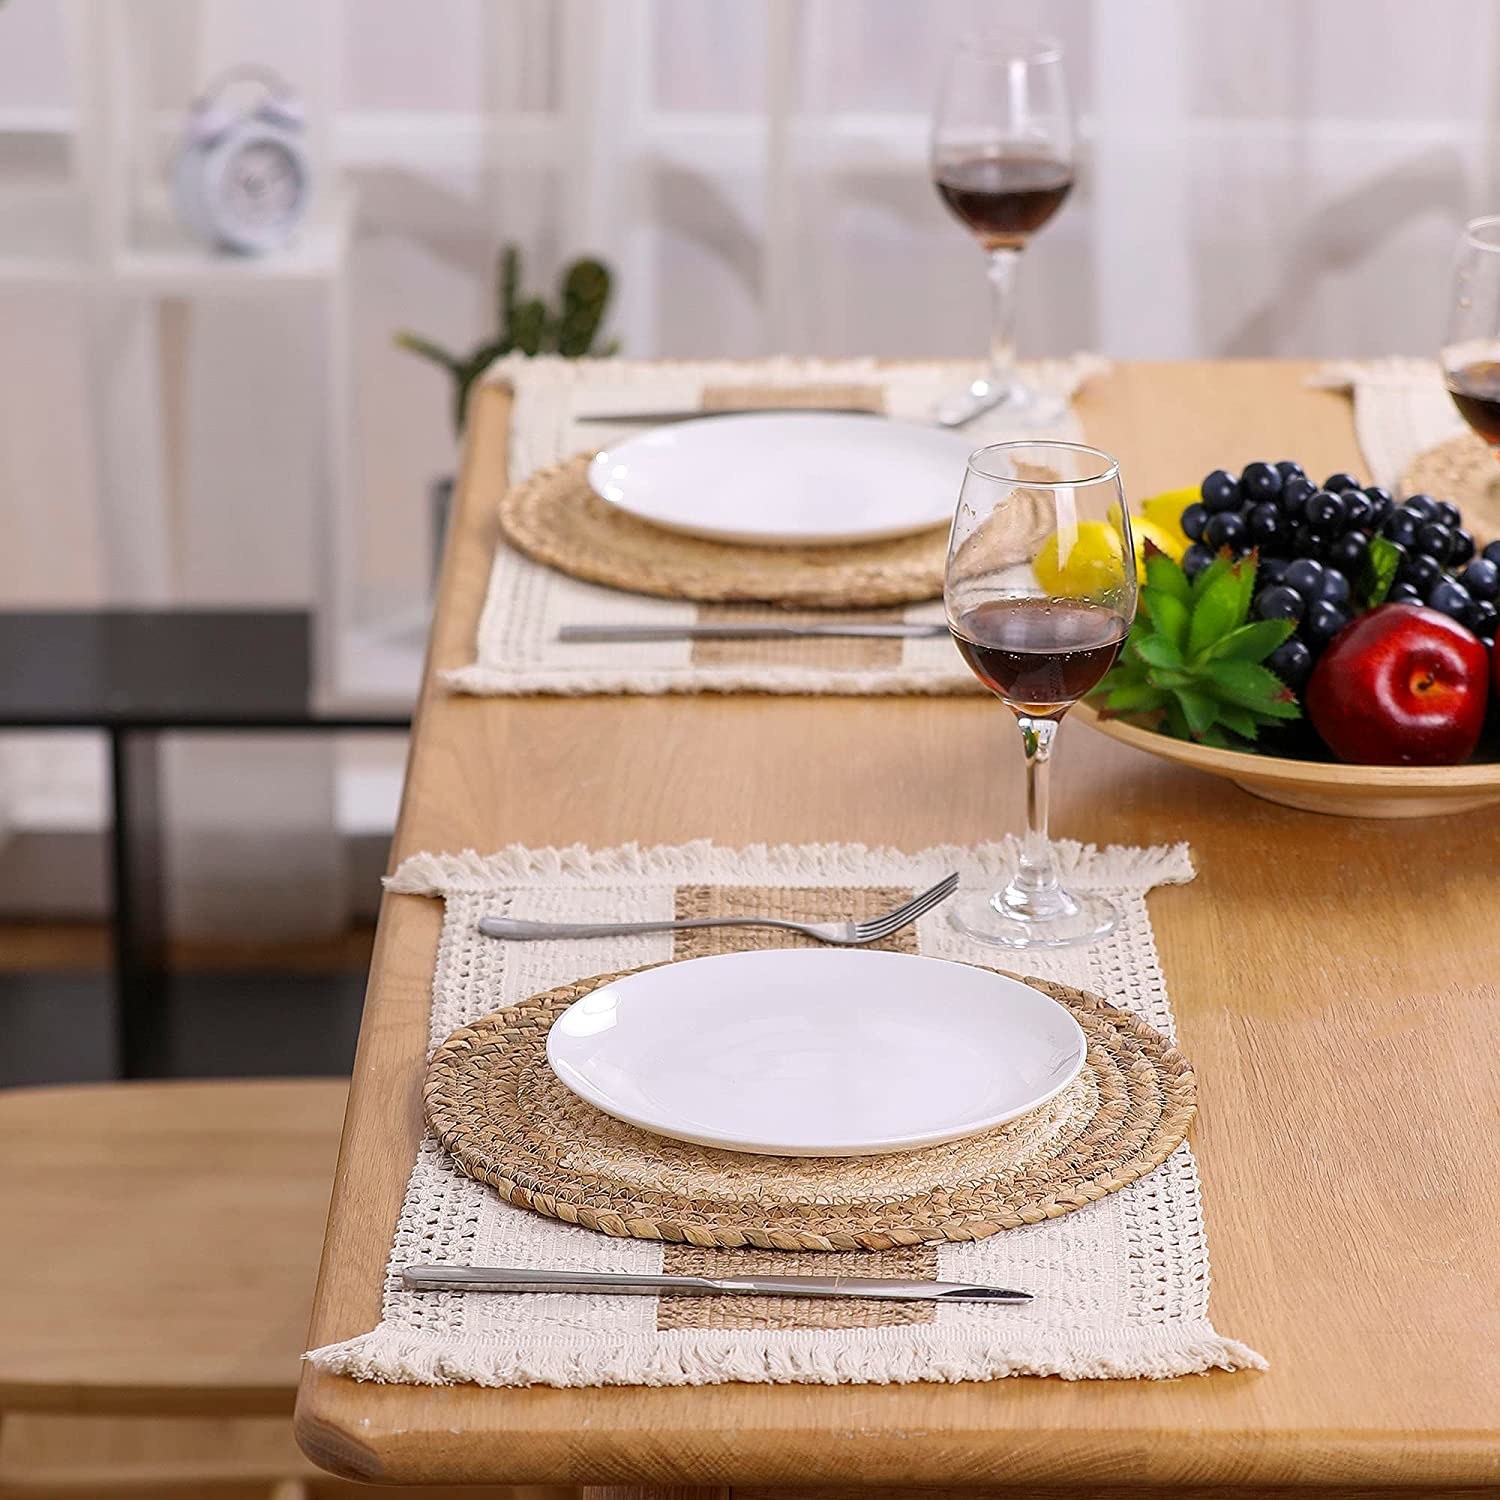 the place mats and napkins placed on a table with plates and cutlery